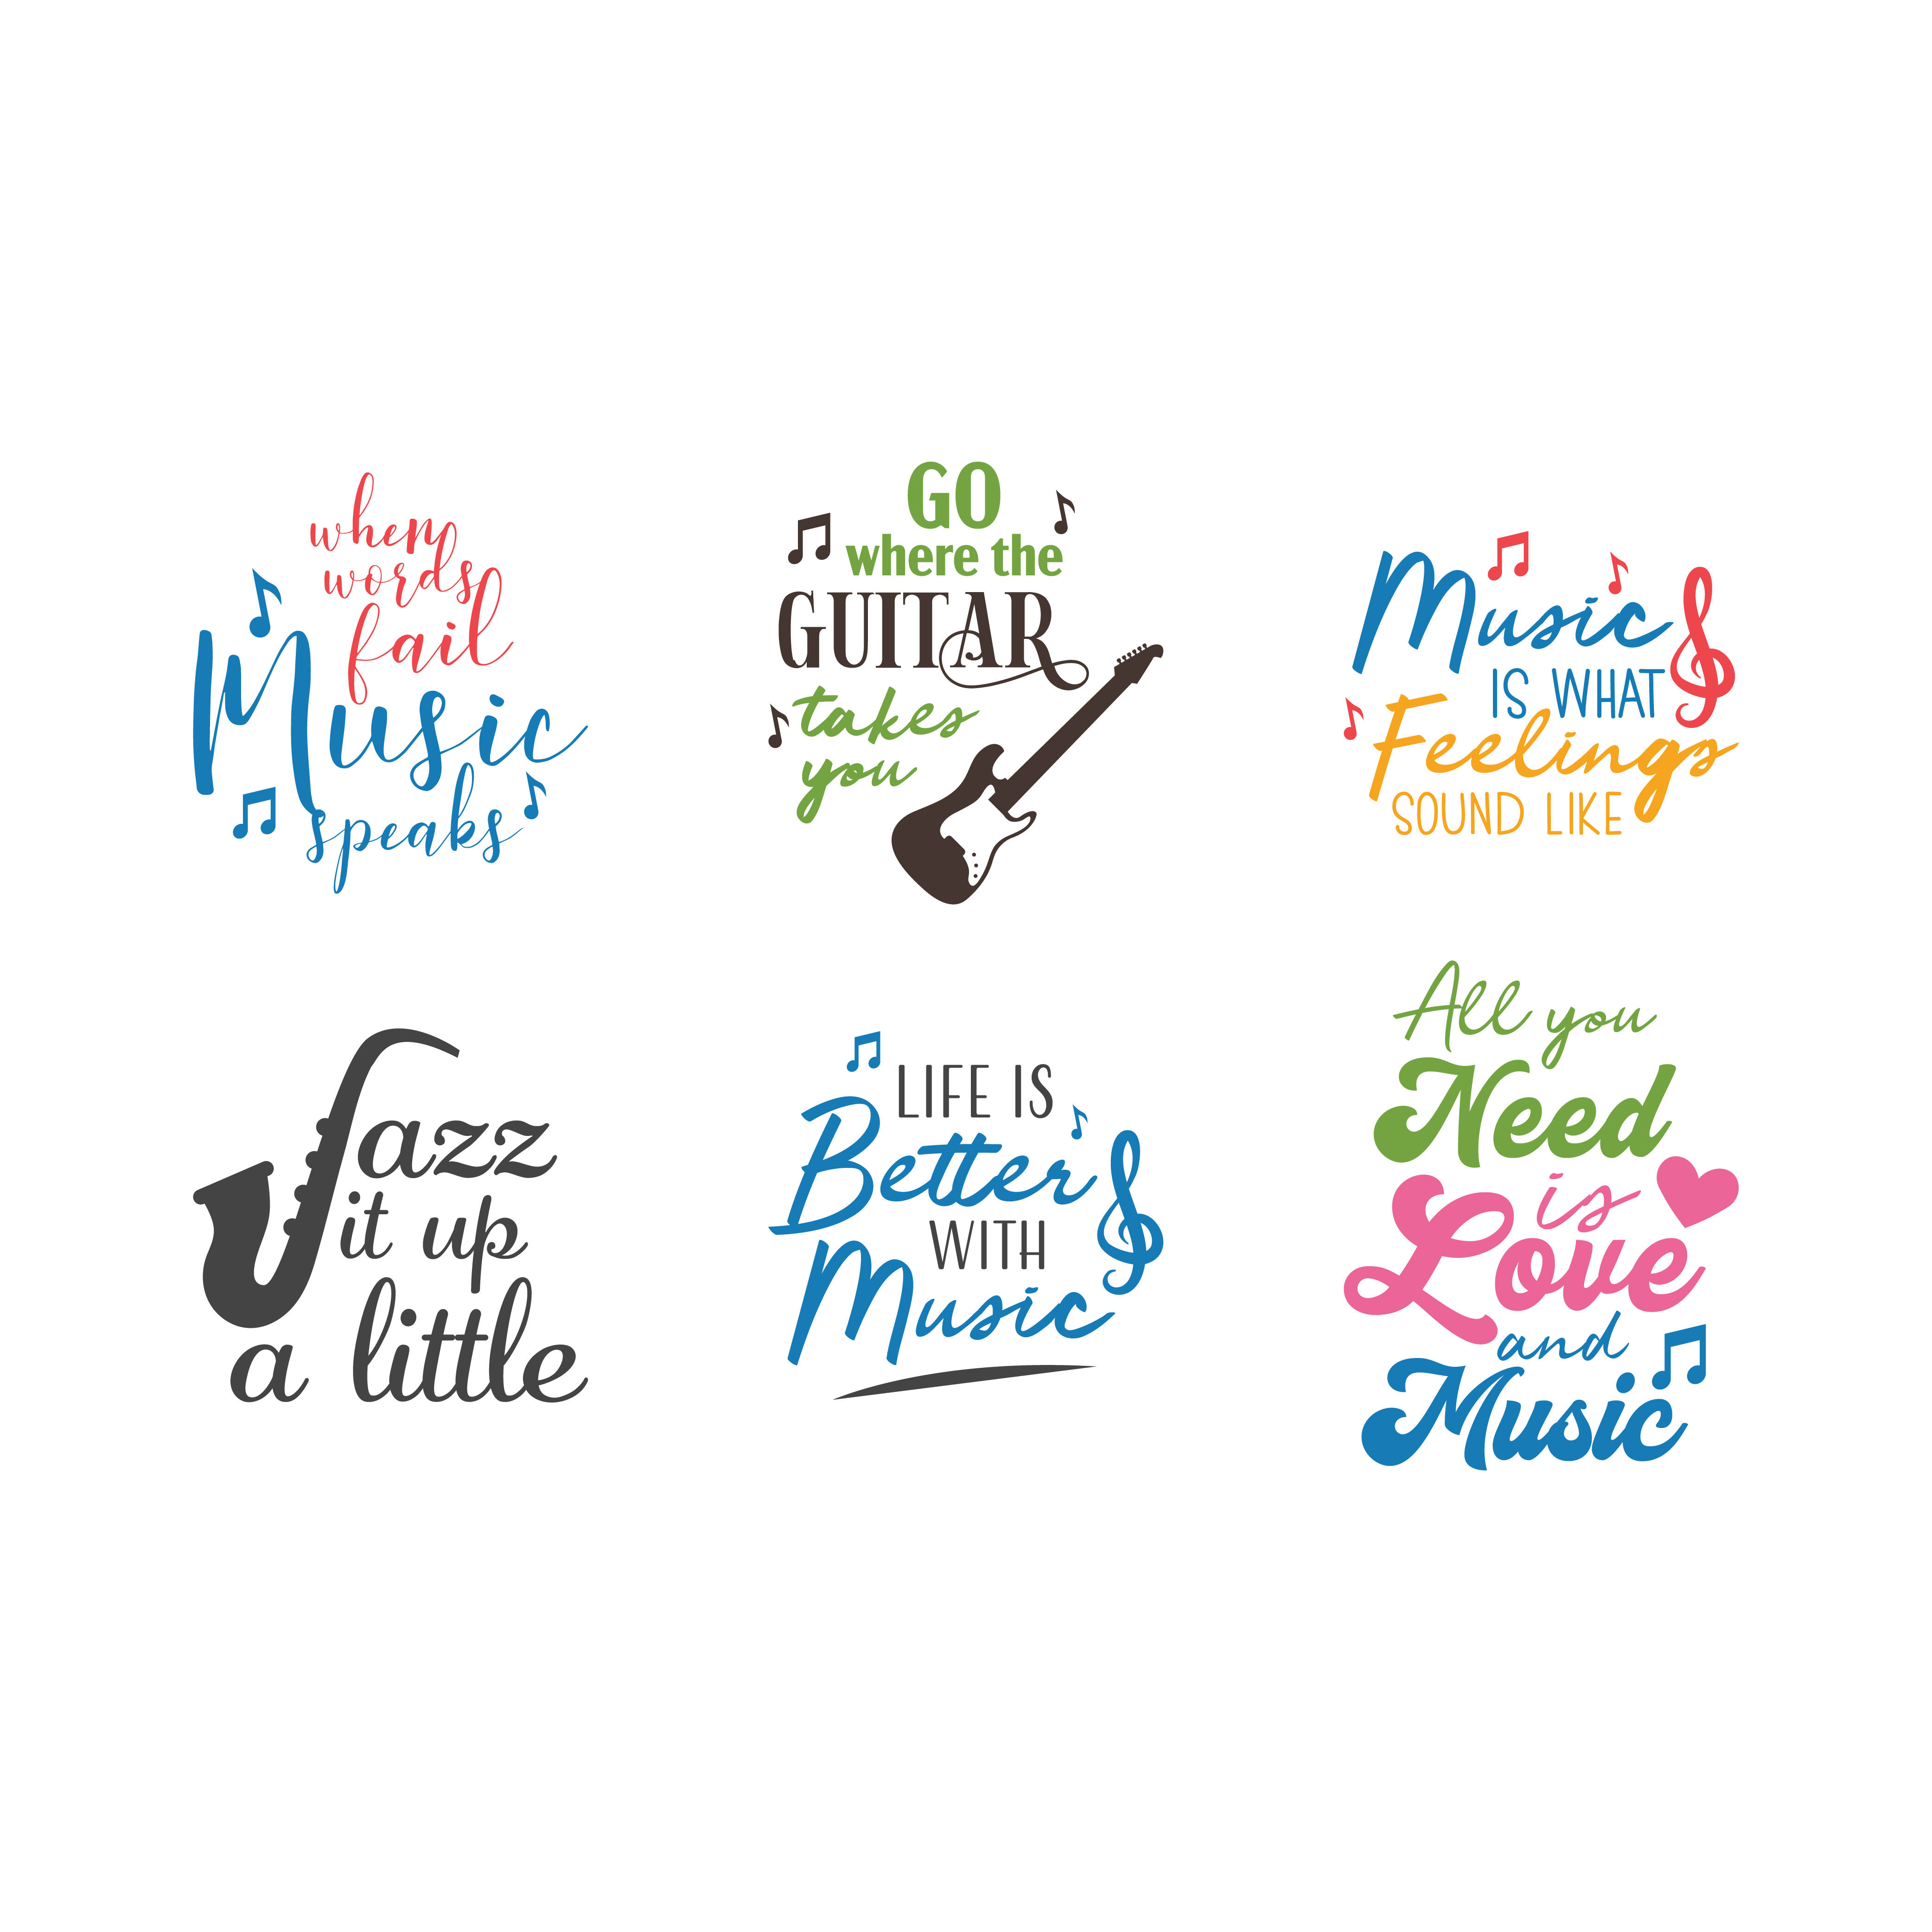 Download Music quote lettering typography set 693141 - Download Free Vectors, Clipart Graphics & Vector Art